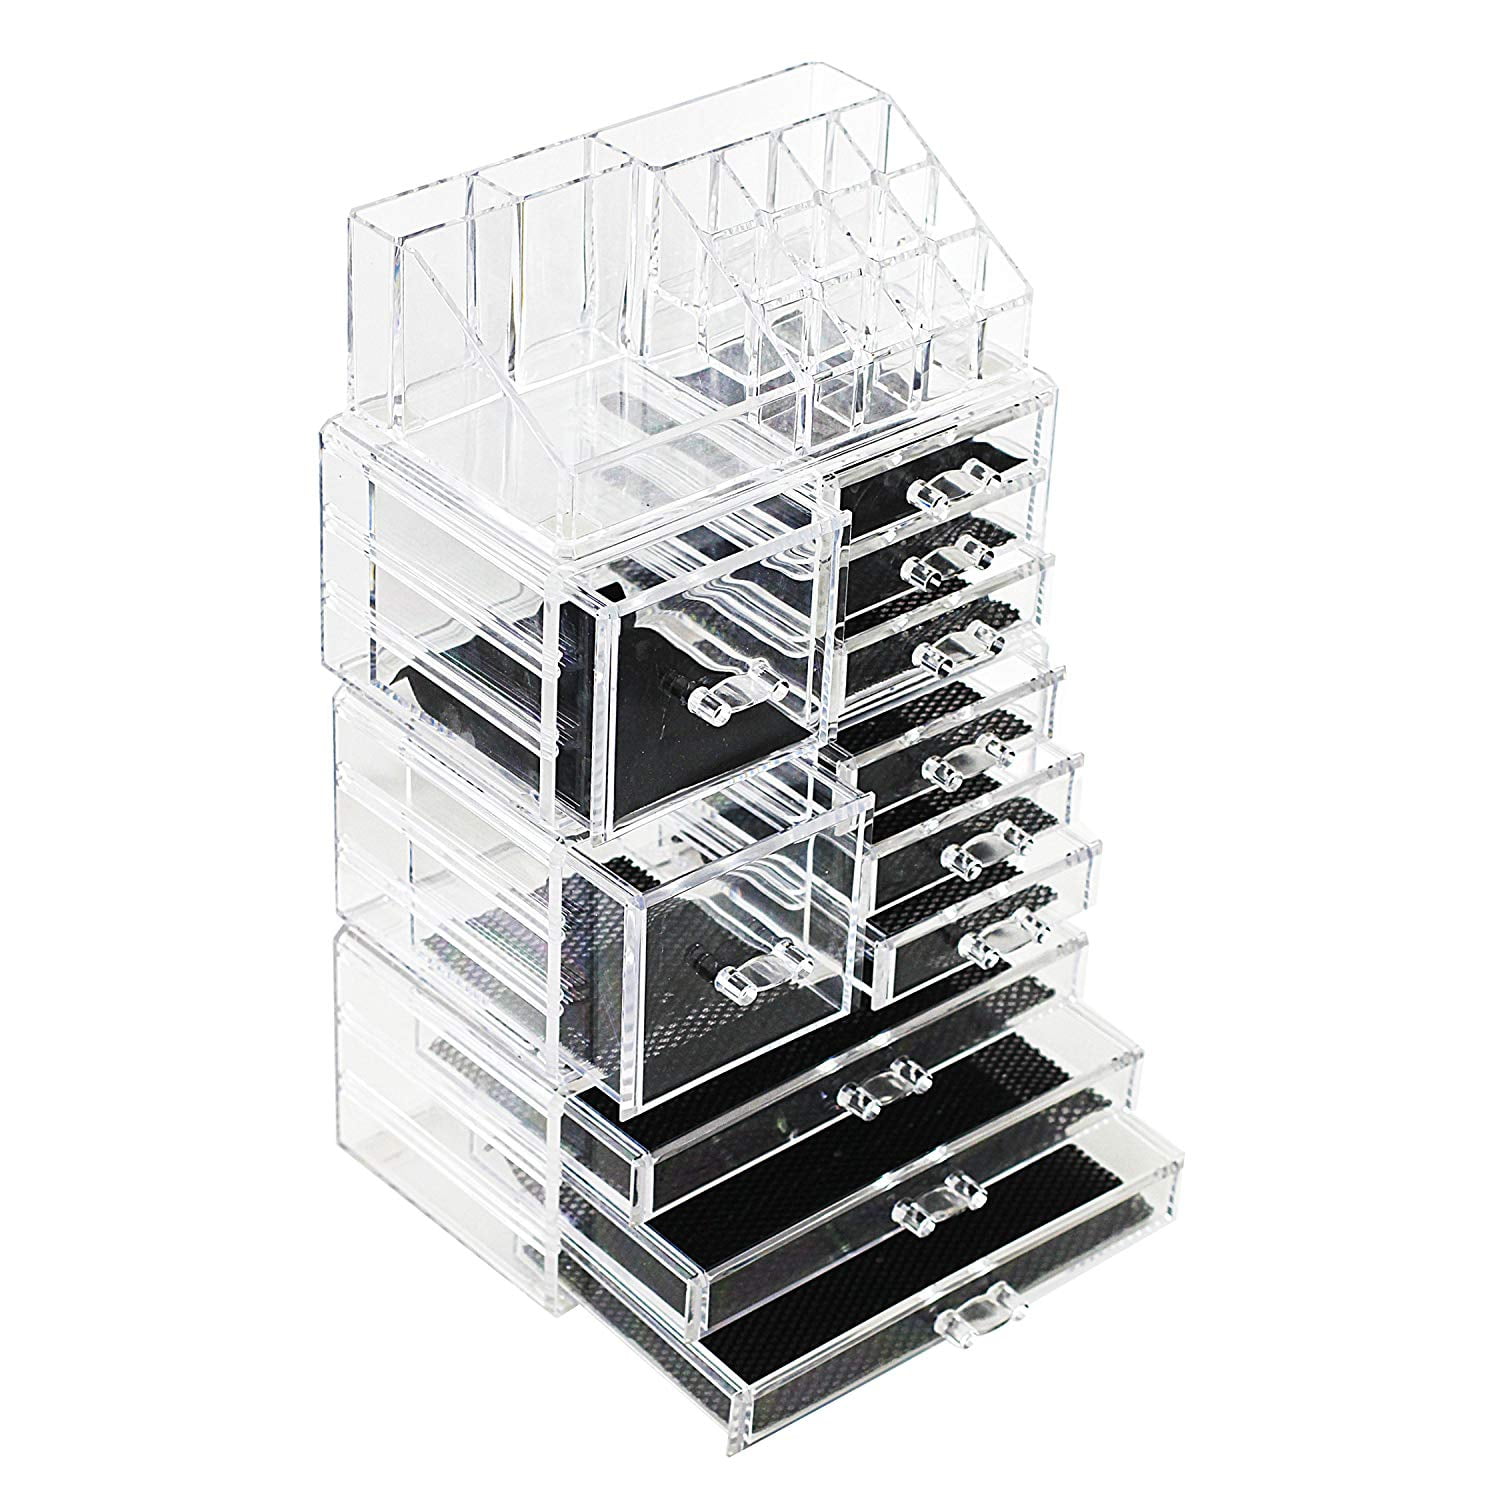 Mantello Acrylic Makeup Pallet Organizer - 7-Section Divided Eyeshadow Palette Organizer - Cash Tray for Cash Stuffing - Easy to Clean - Clear Acryli